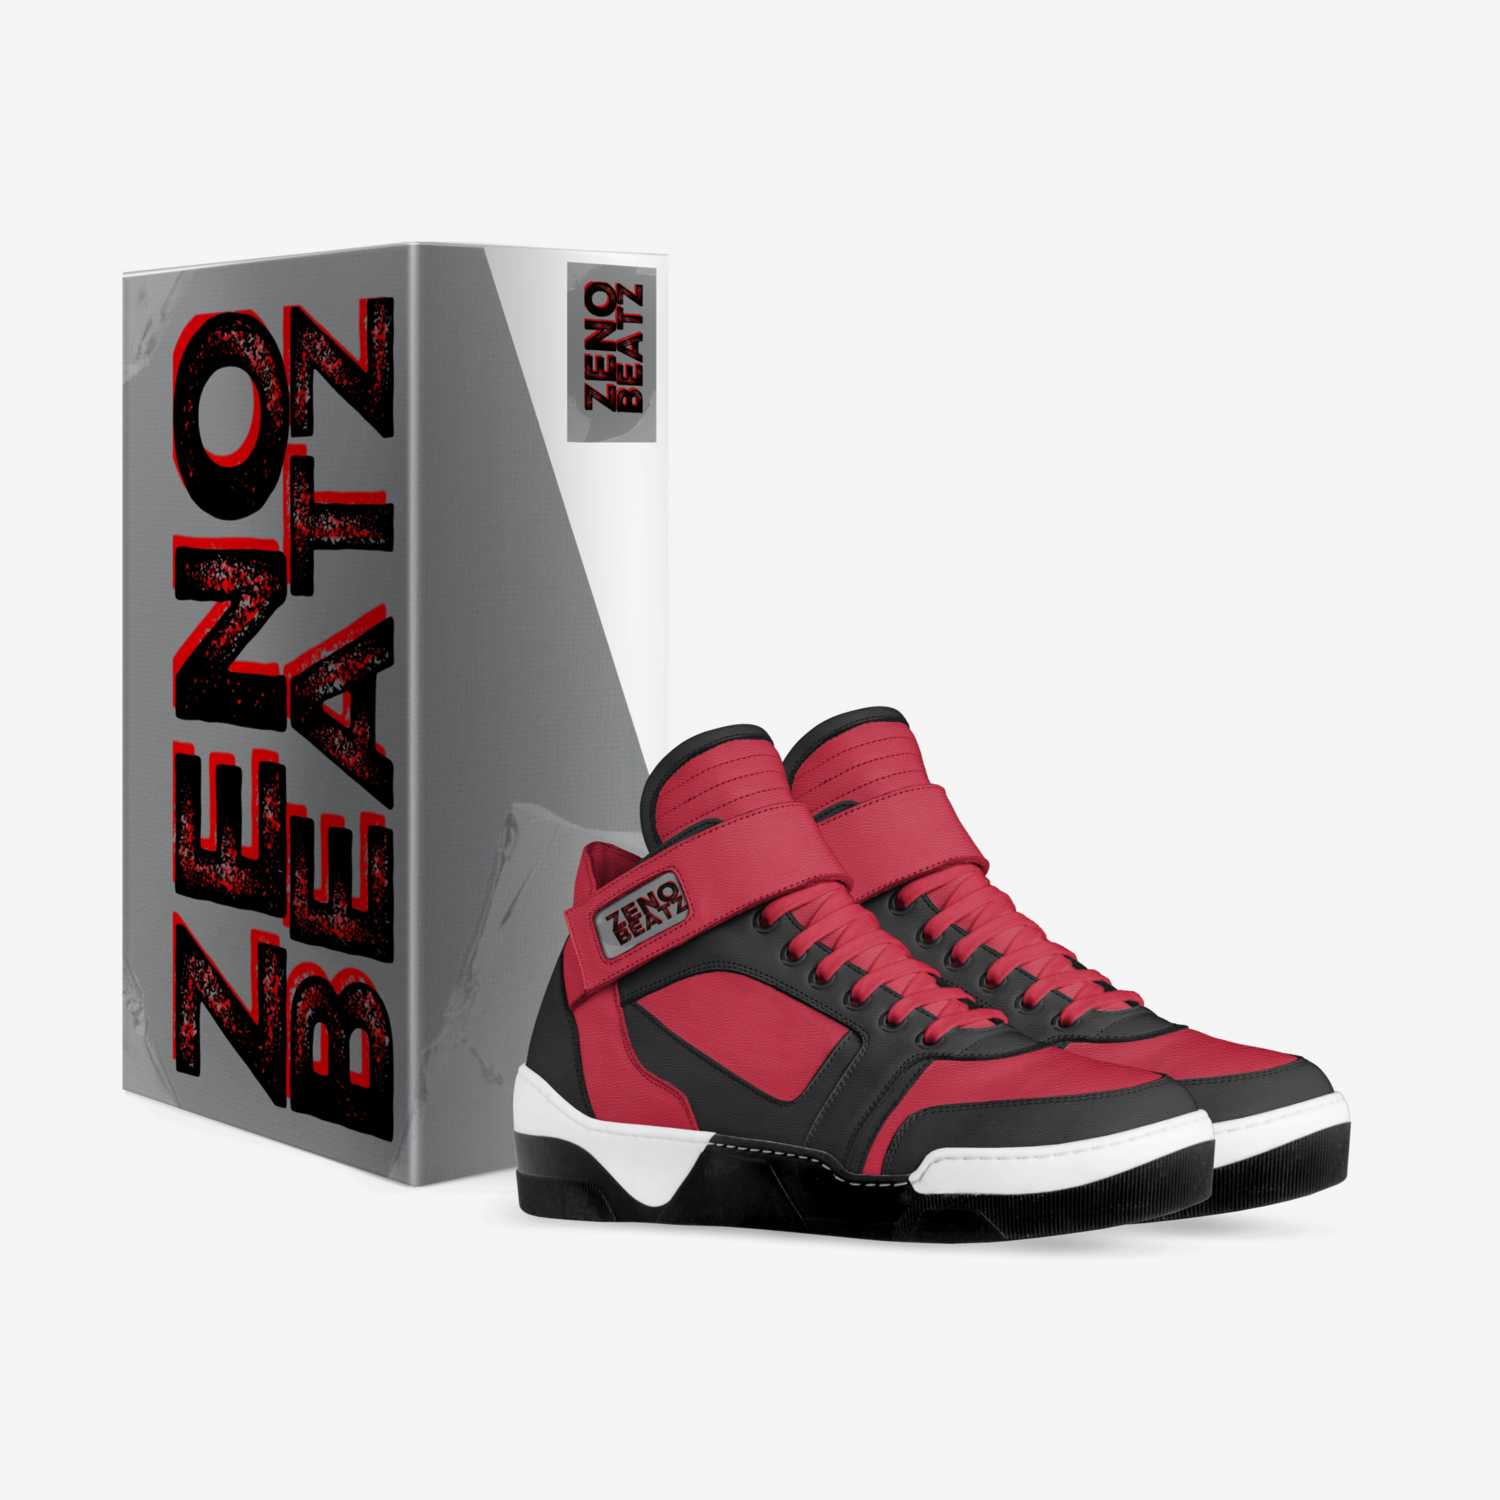 ZENO custom made in Italy shoes by Alexander Nervo | Box view